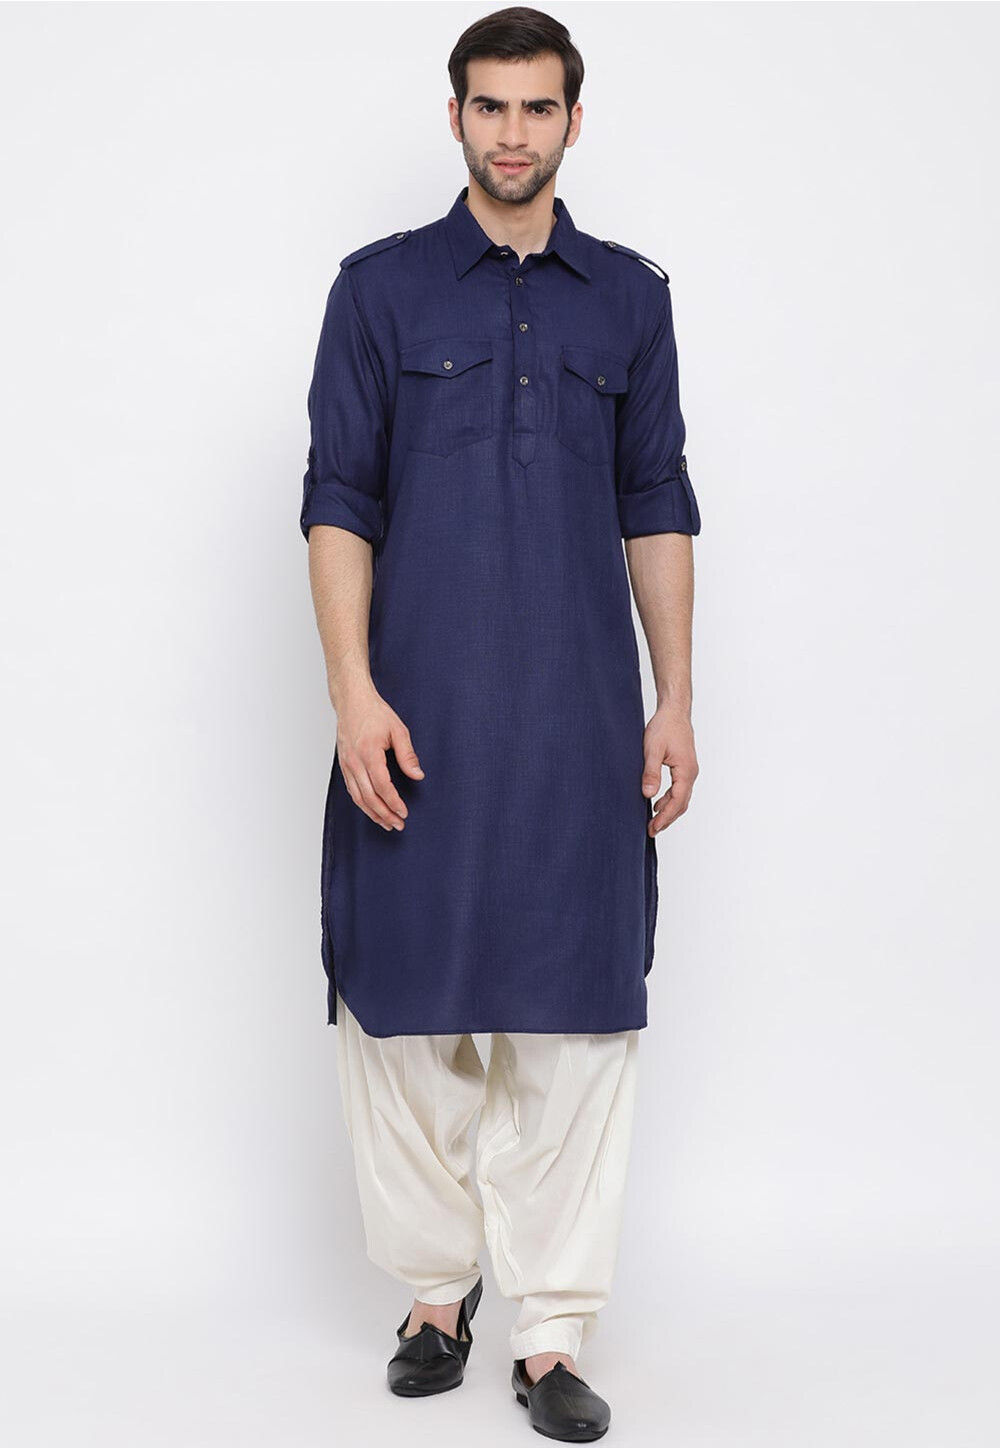 Solid Color Cotton Pathani Suit in Navy Blue : MTR2315